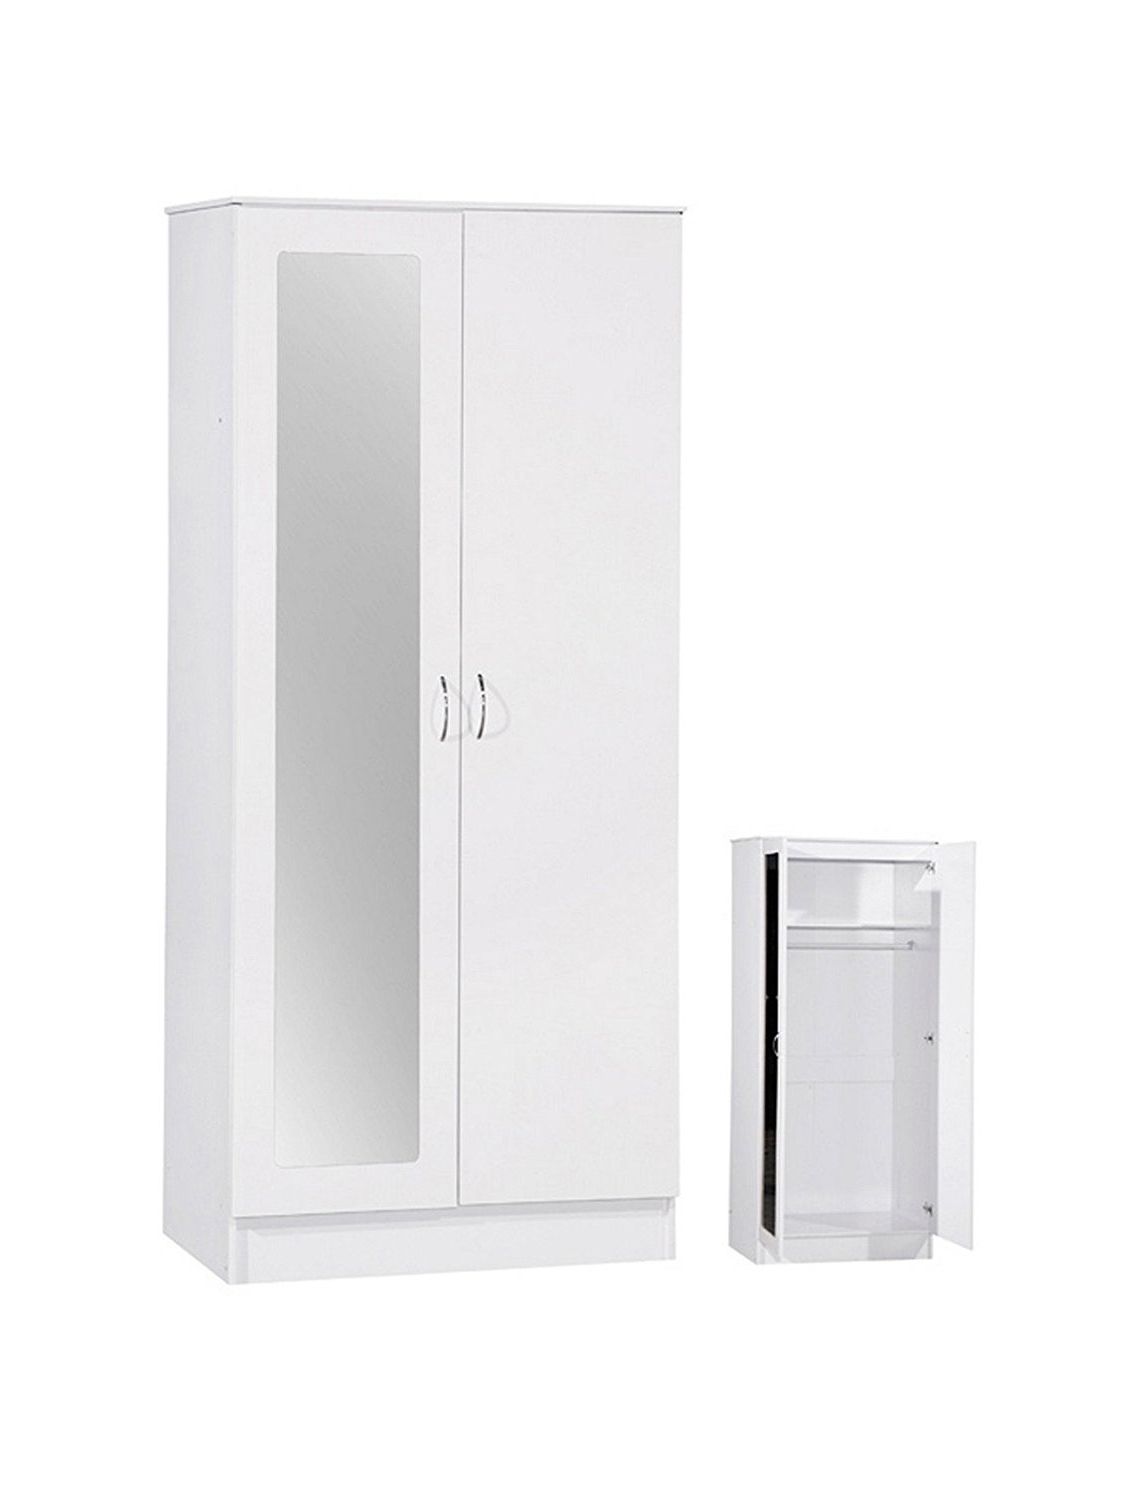 Fashionable Two Door White Wardrobes In Alpha High Gloss 2 Door Wardrobe With Mirror, Shelf And Hanging (View 6 of 15)